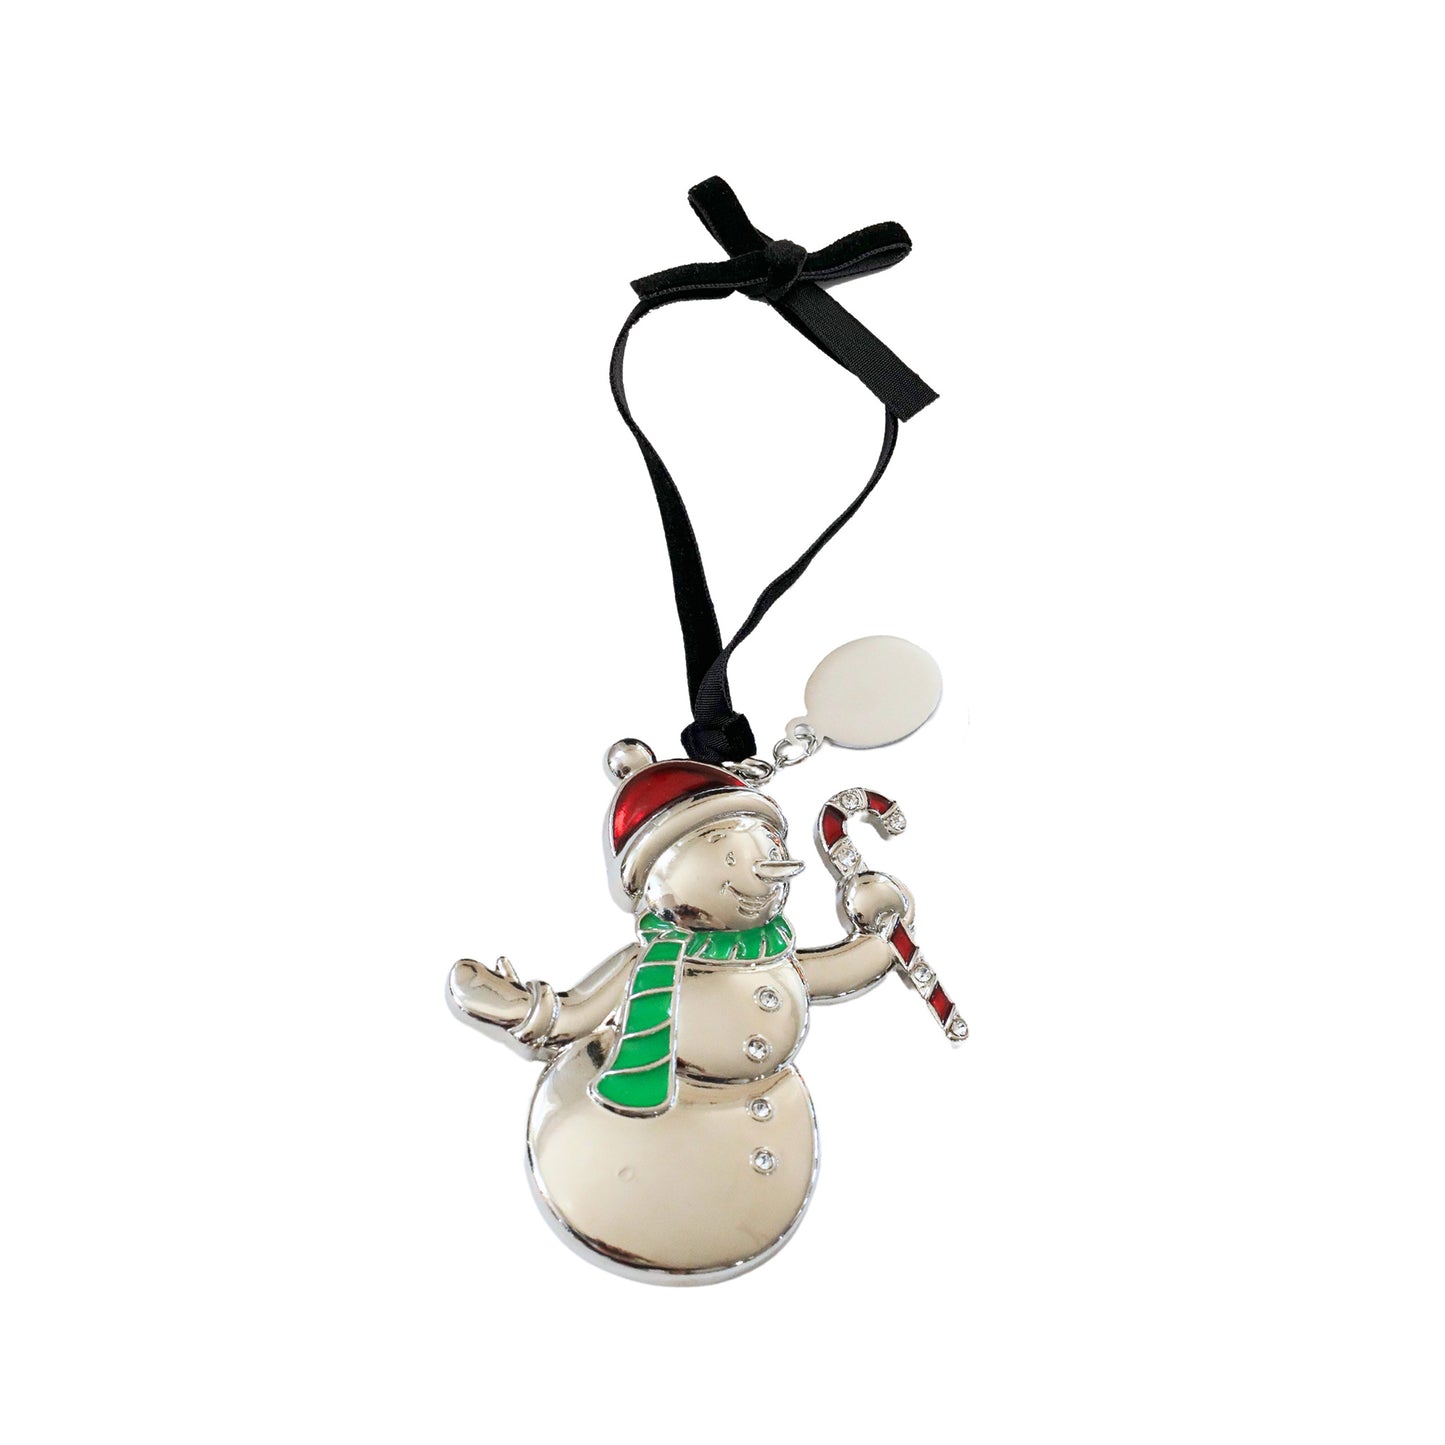 3D Snowman Ornament with Engraving Tag